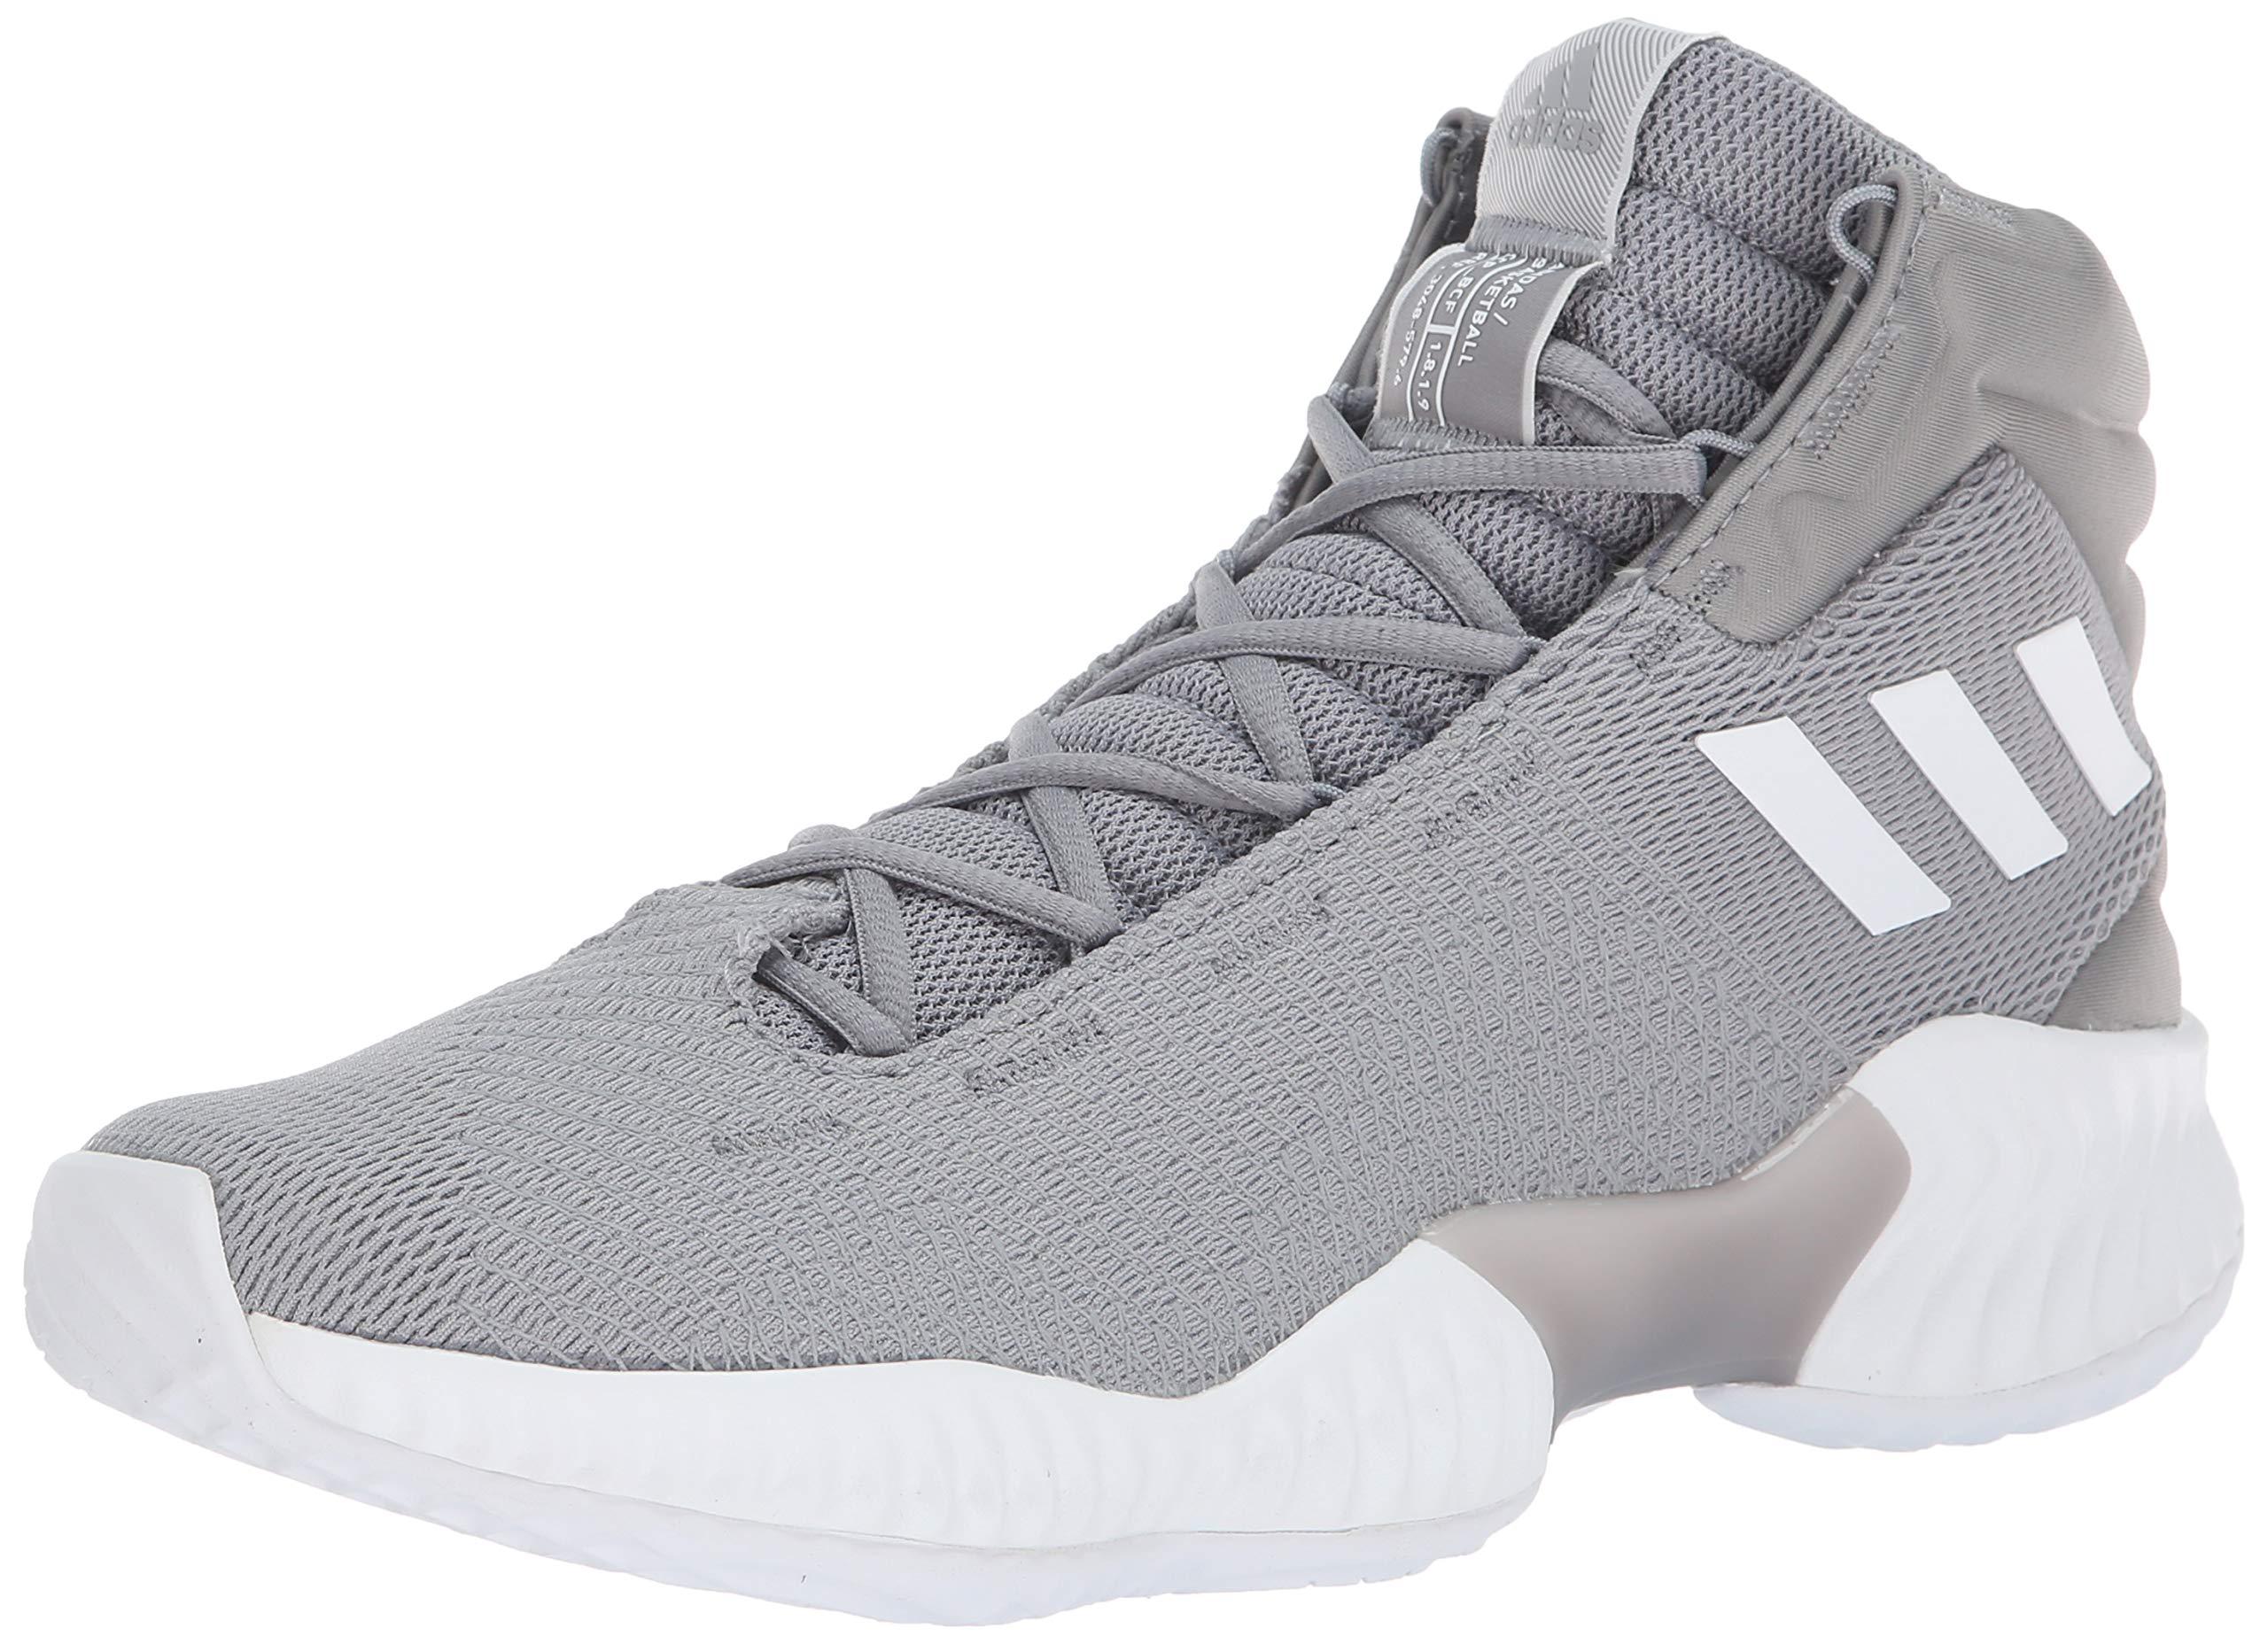 adidas Rubber Pro Bounce 2018 Basketball Shoe in Gray for Men - Lyst